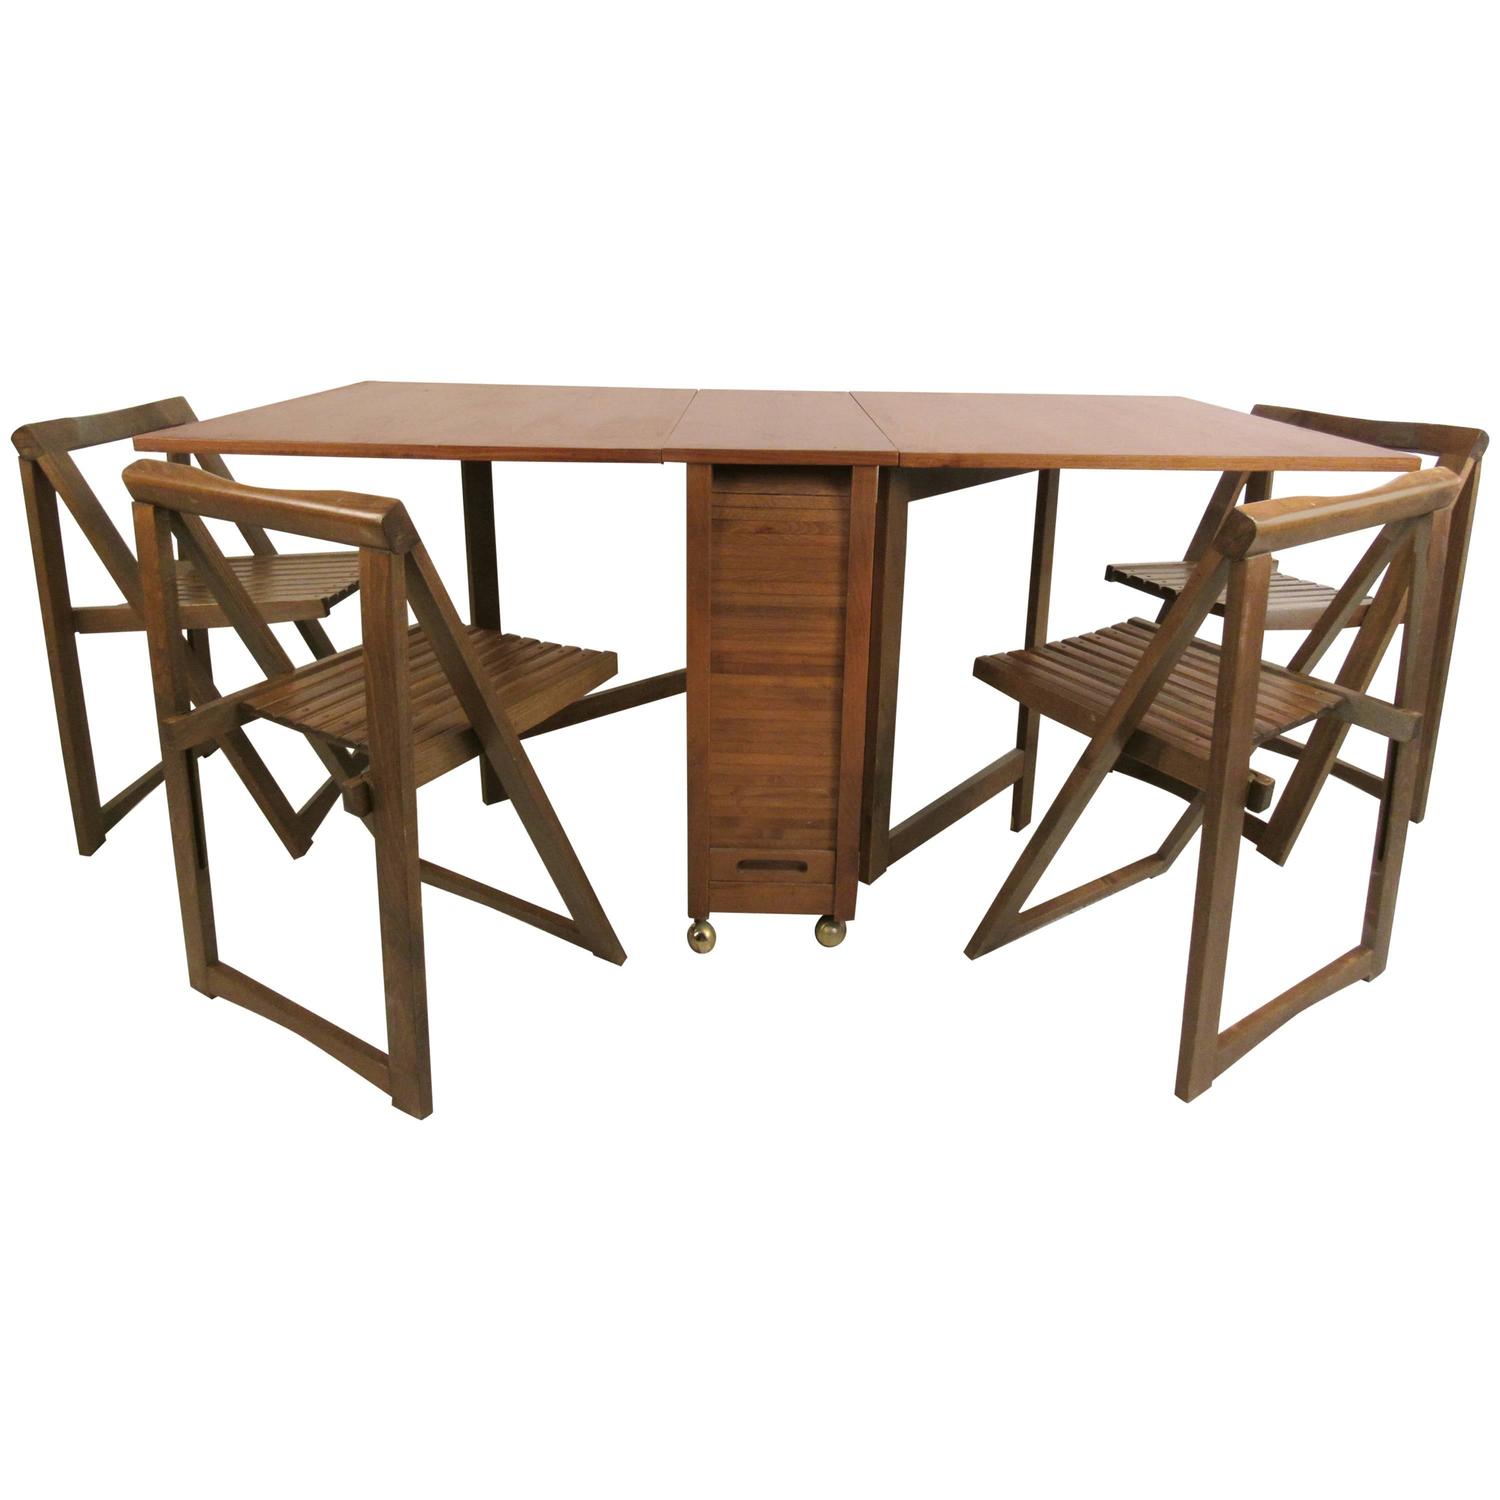 Mid-Century Modern Drop-Leaf Table with Chairs at 1stdibs